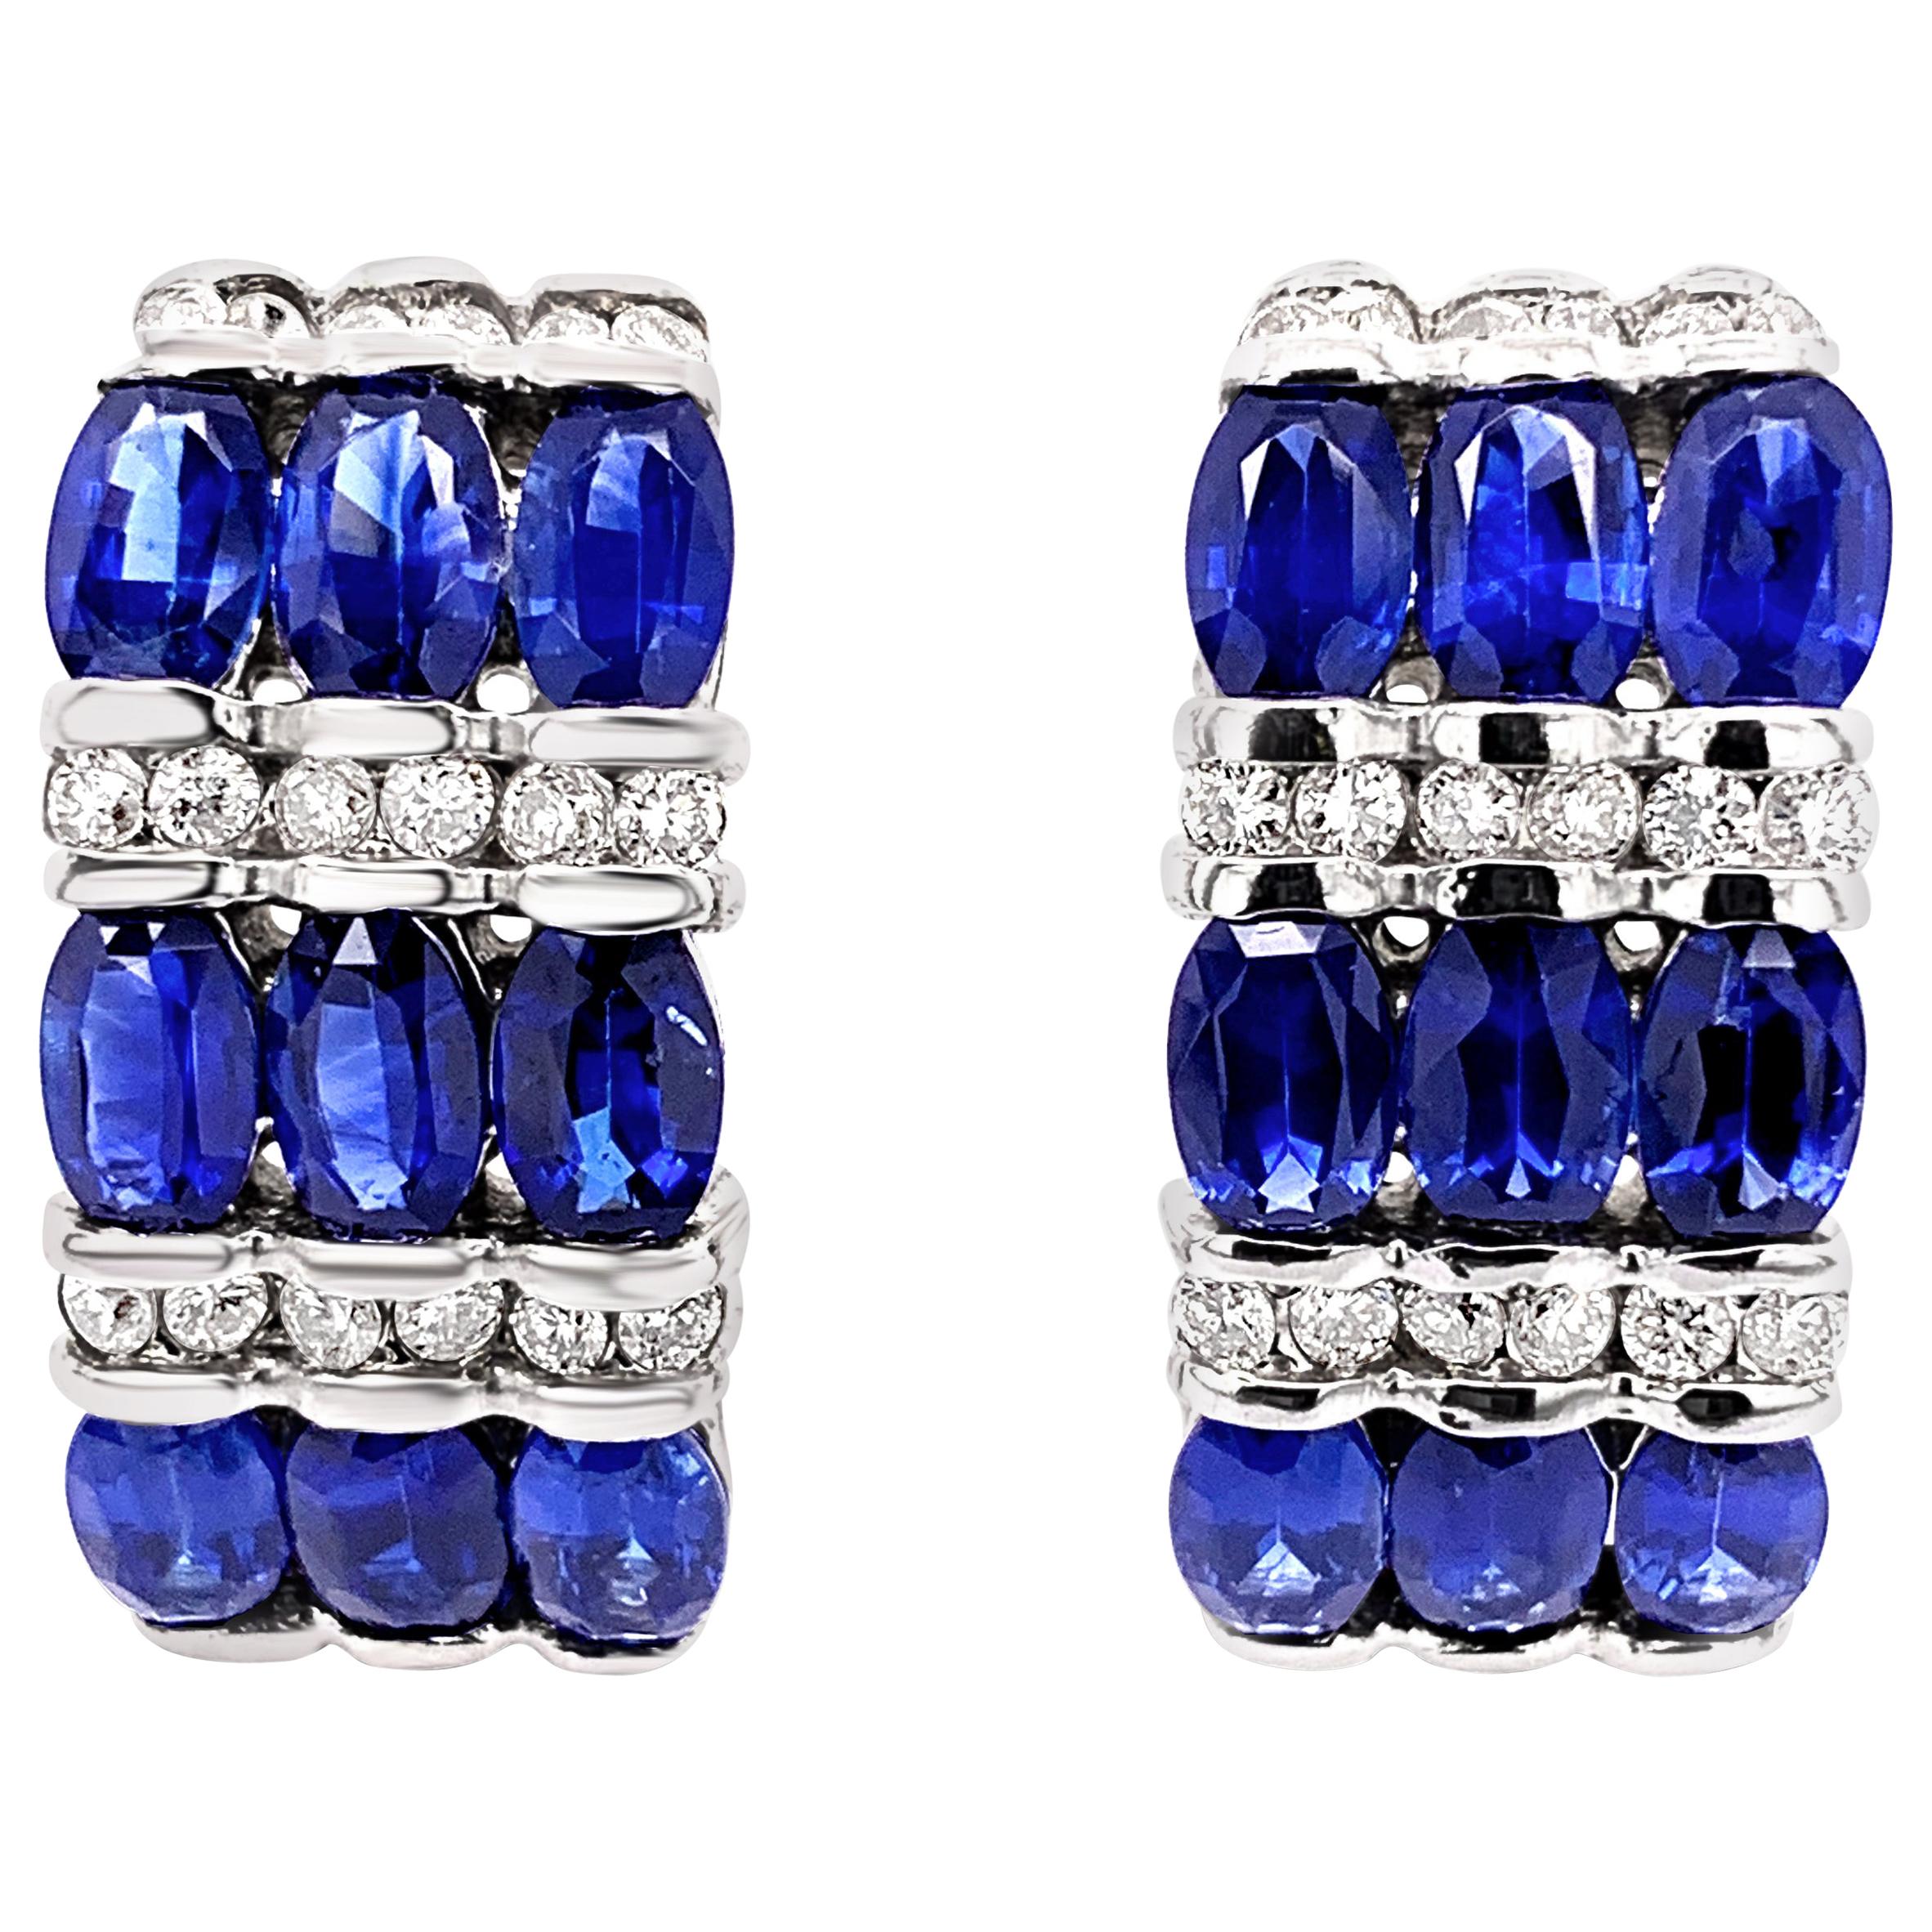 4.91 Carat 'Total Weight' Oval Sapphire and Diamond Earrings in 18K White Gold For Sale